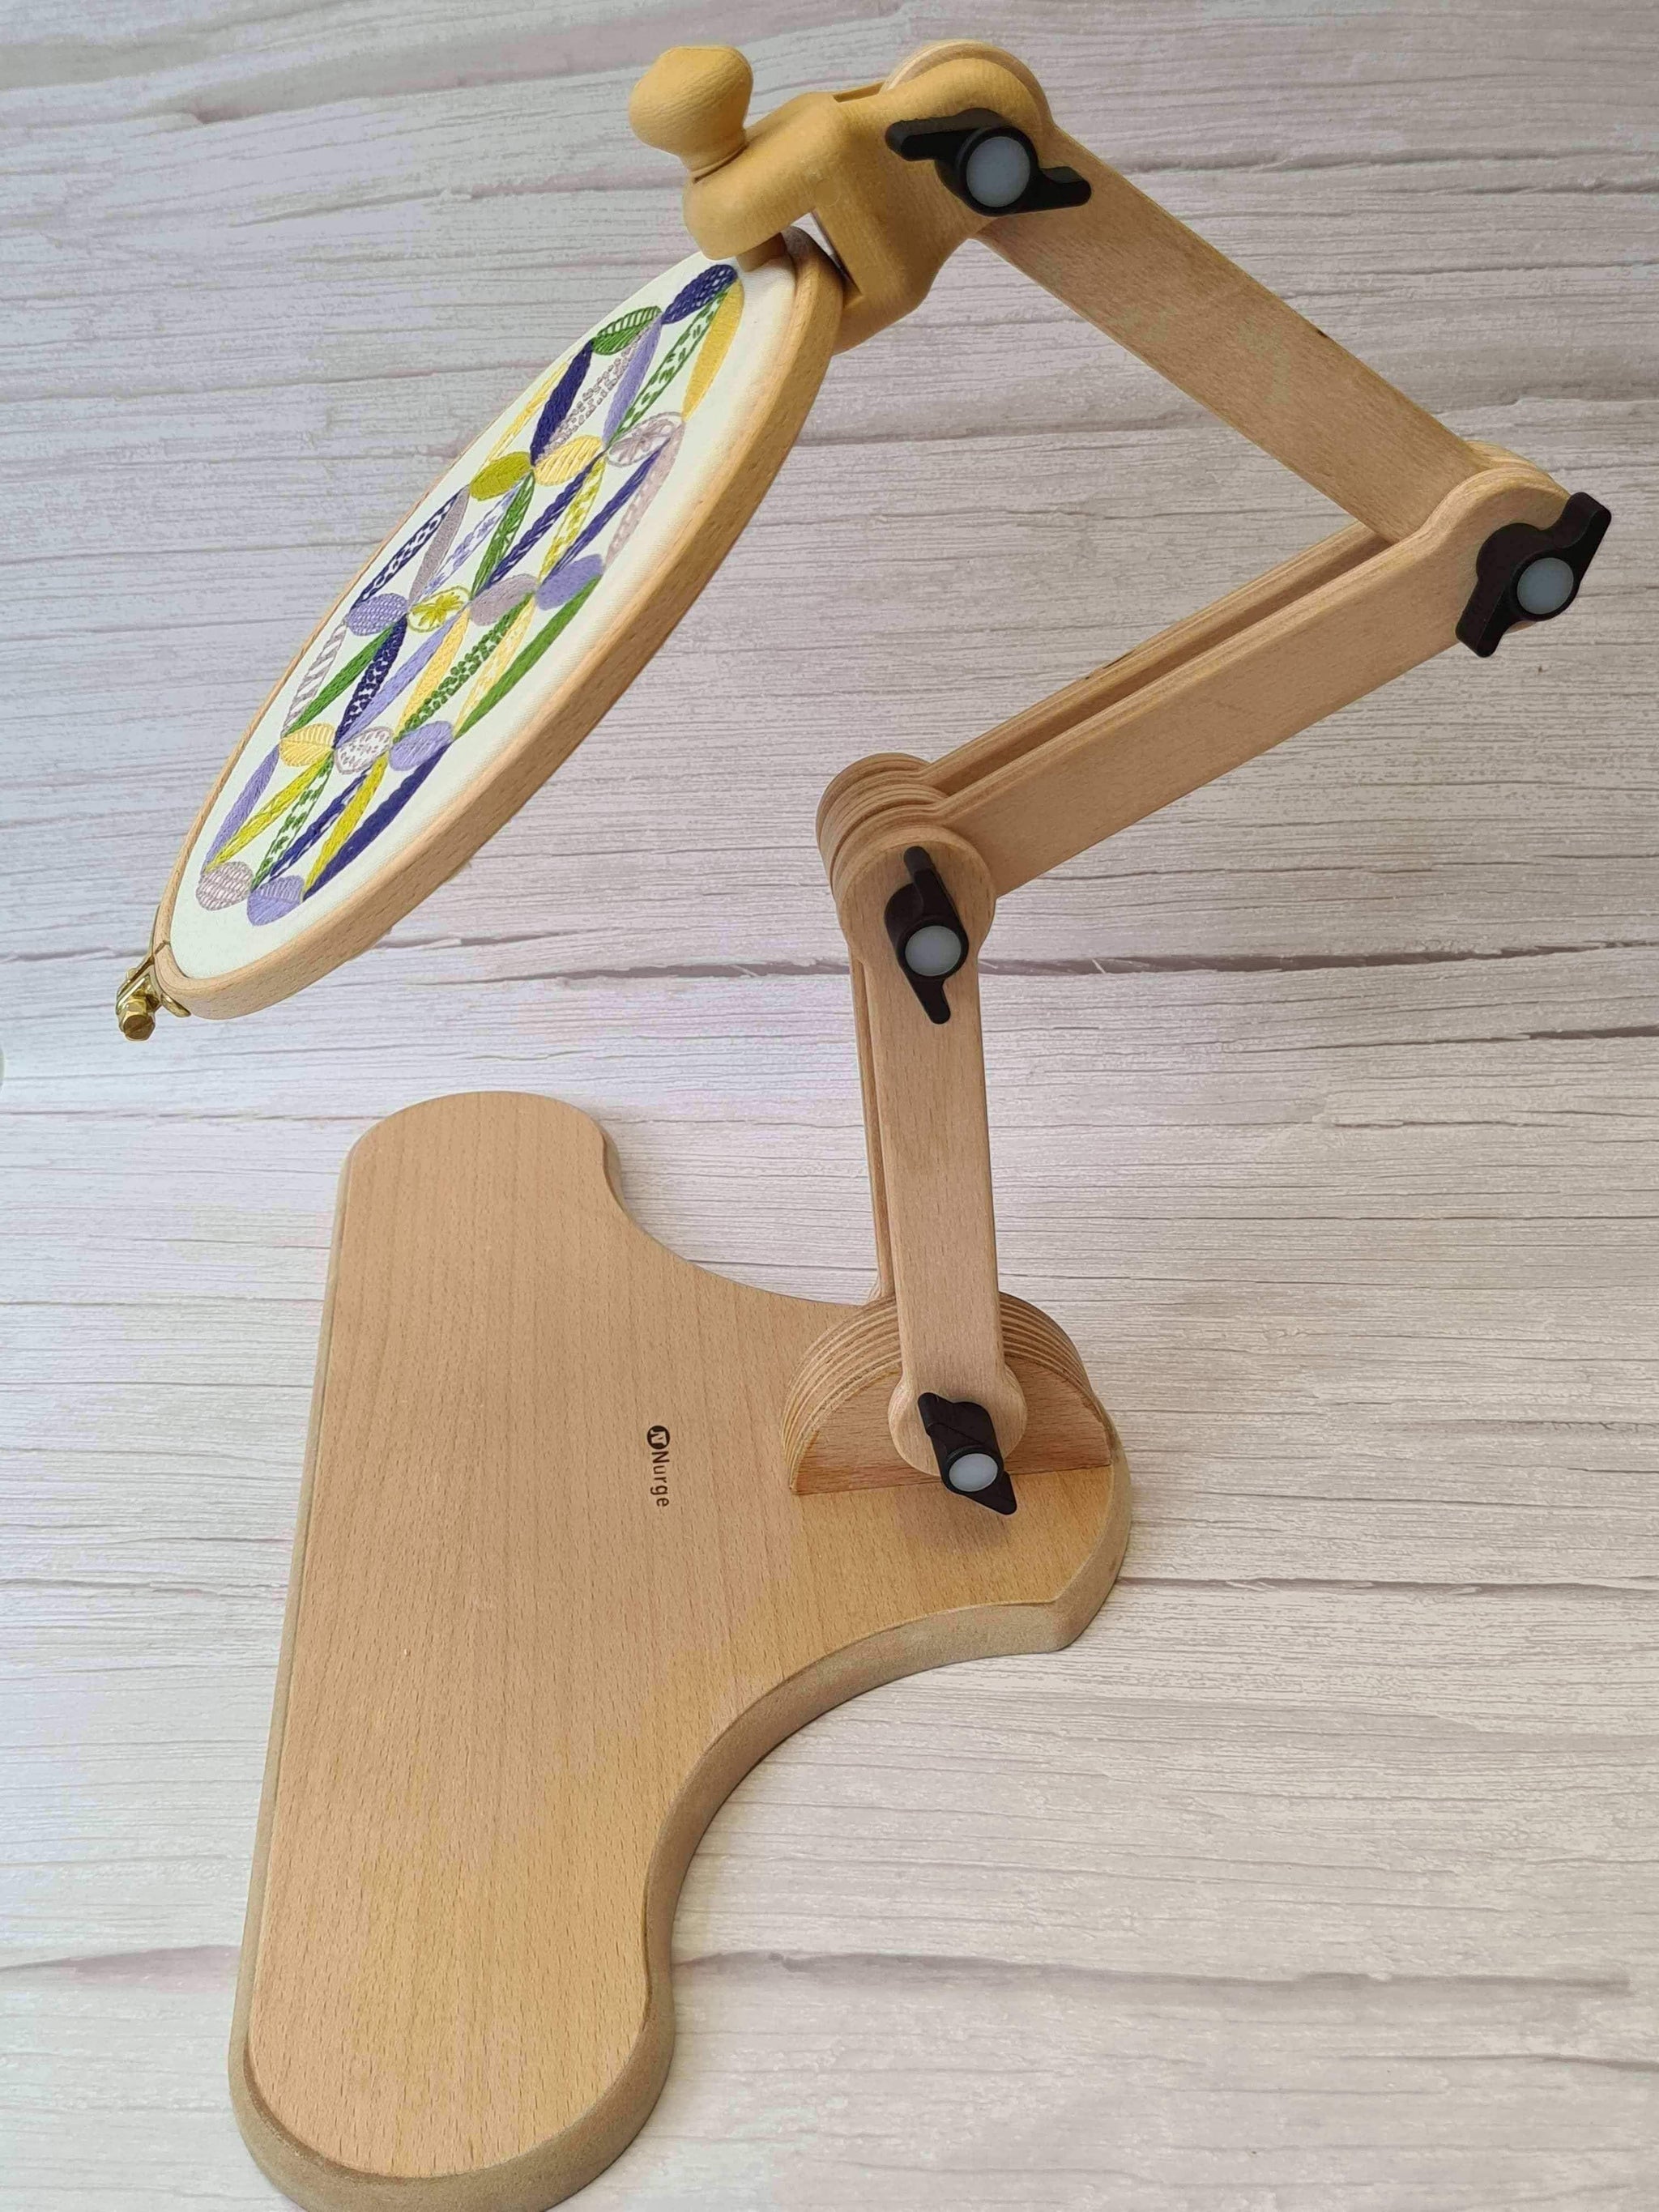 Embroidery Stand for Hoop, Wooden Table Frame Hoop Holder With Adjustable  Height, Tools for Hand Embroidery 